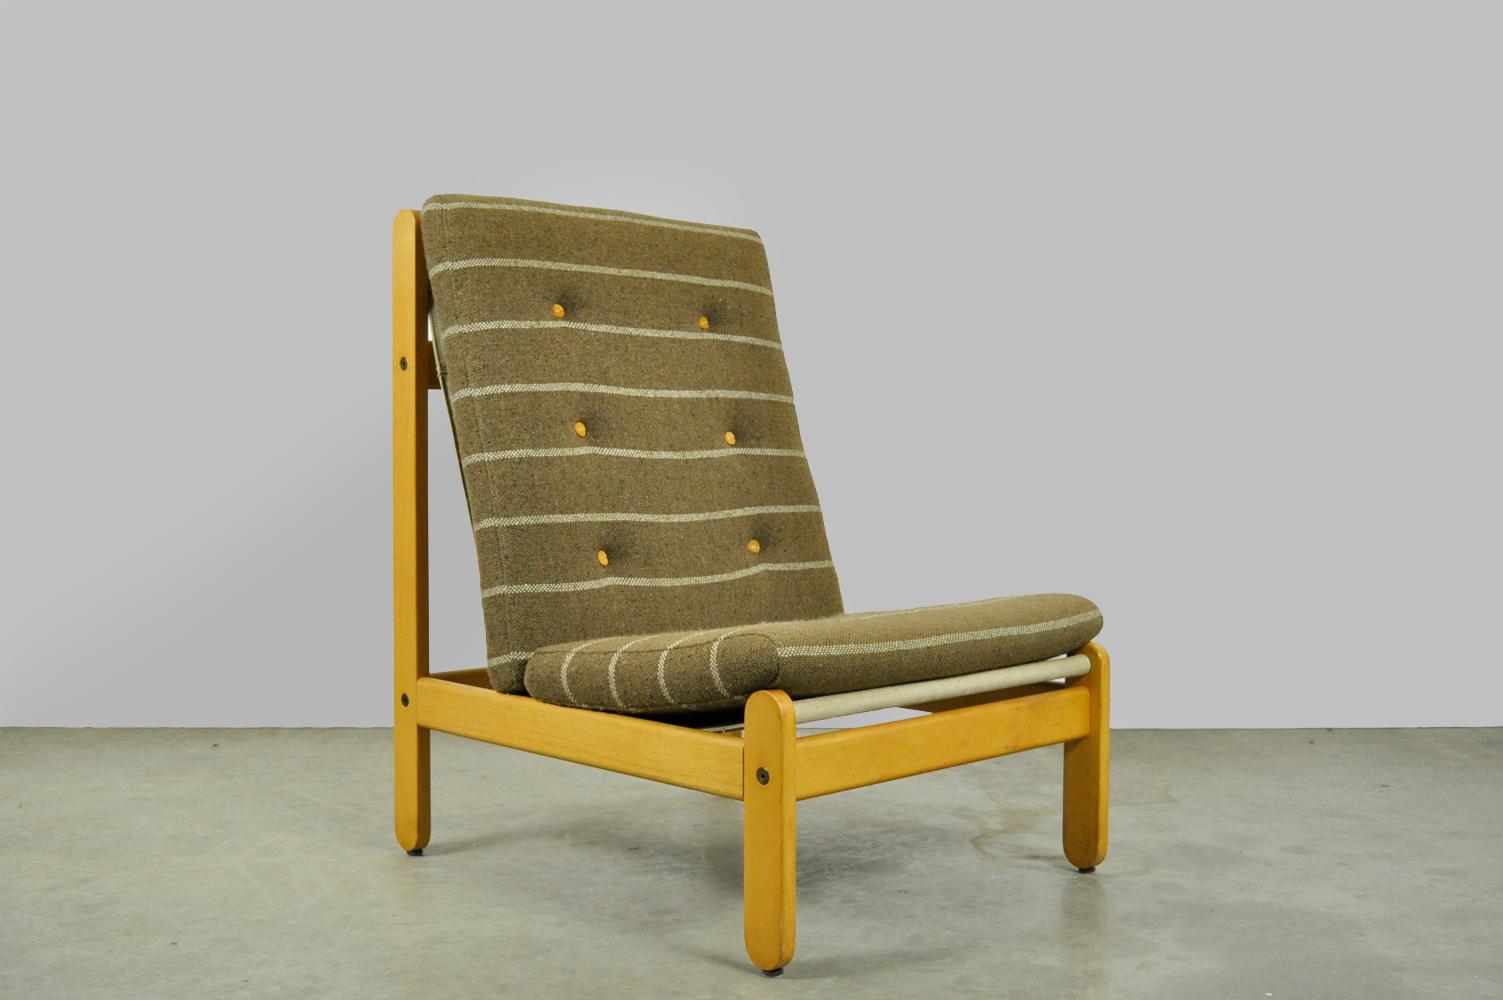 Special beech wood lounge armchair designed by the Dane Bernt Petersen and produced by Schiang Furniture, 1960s. 
The armchair has a beech wood frame with a canvas seat hanging between them. There are two tufted brown wool cushions on the canvas